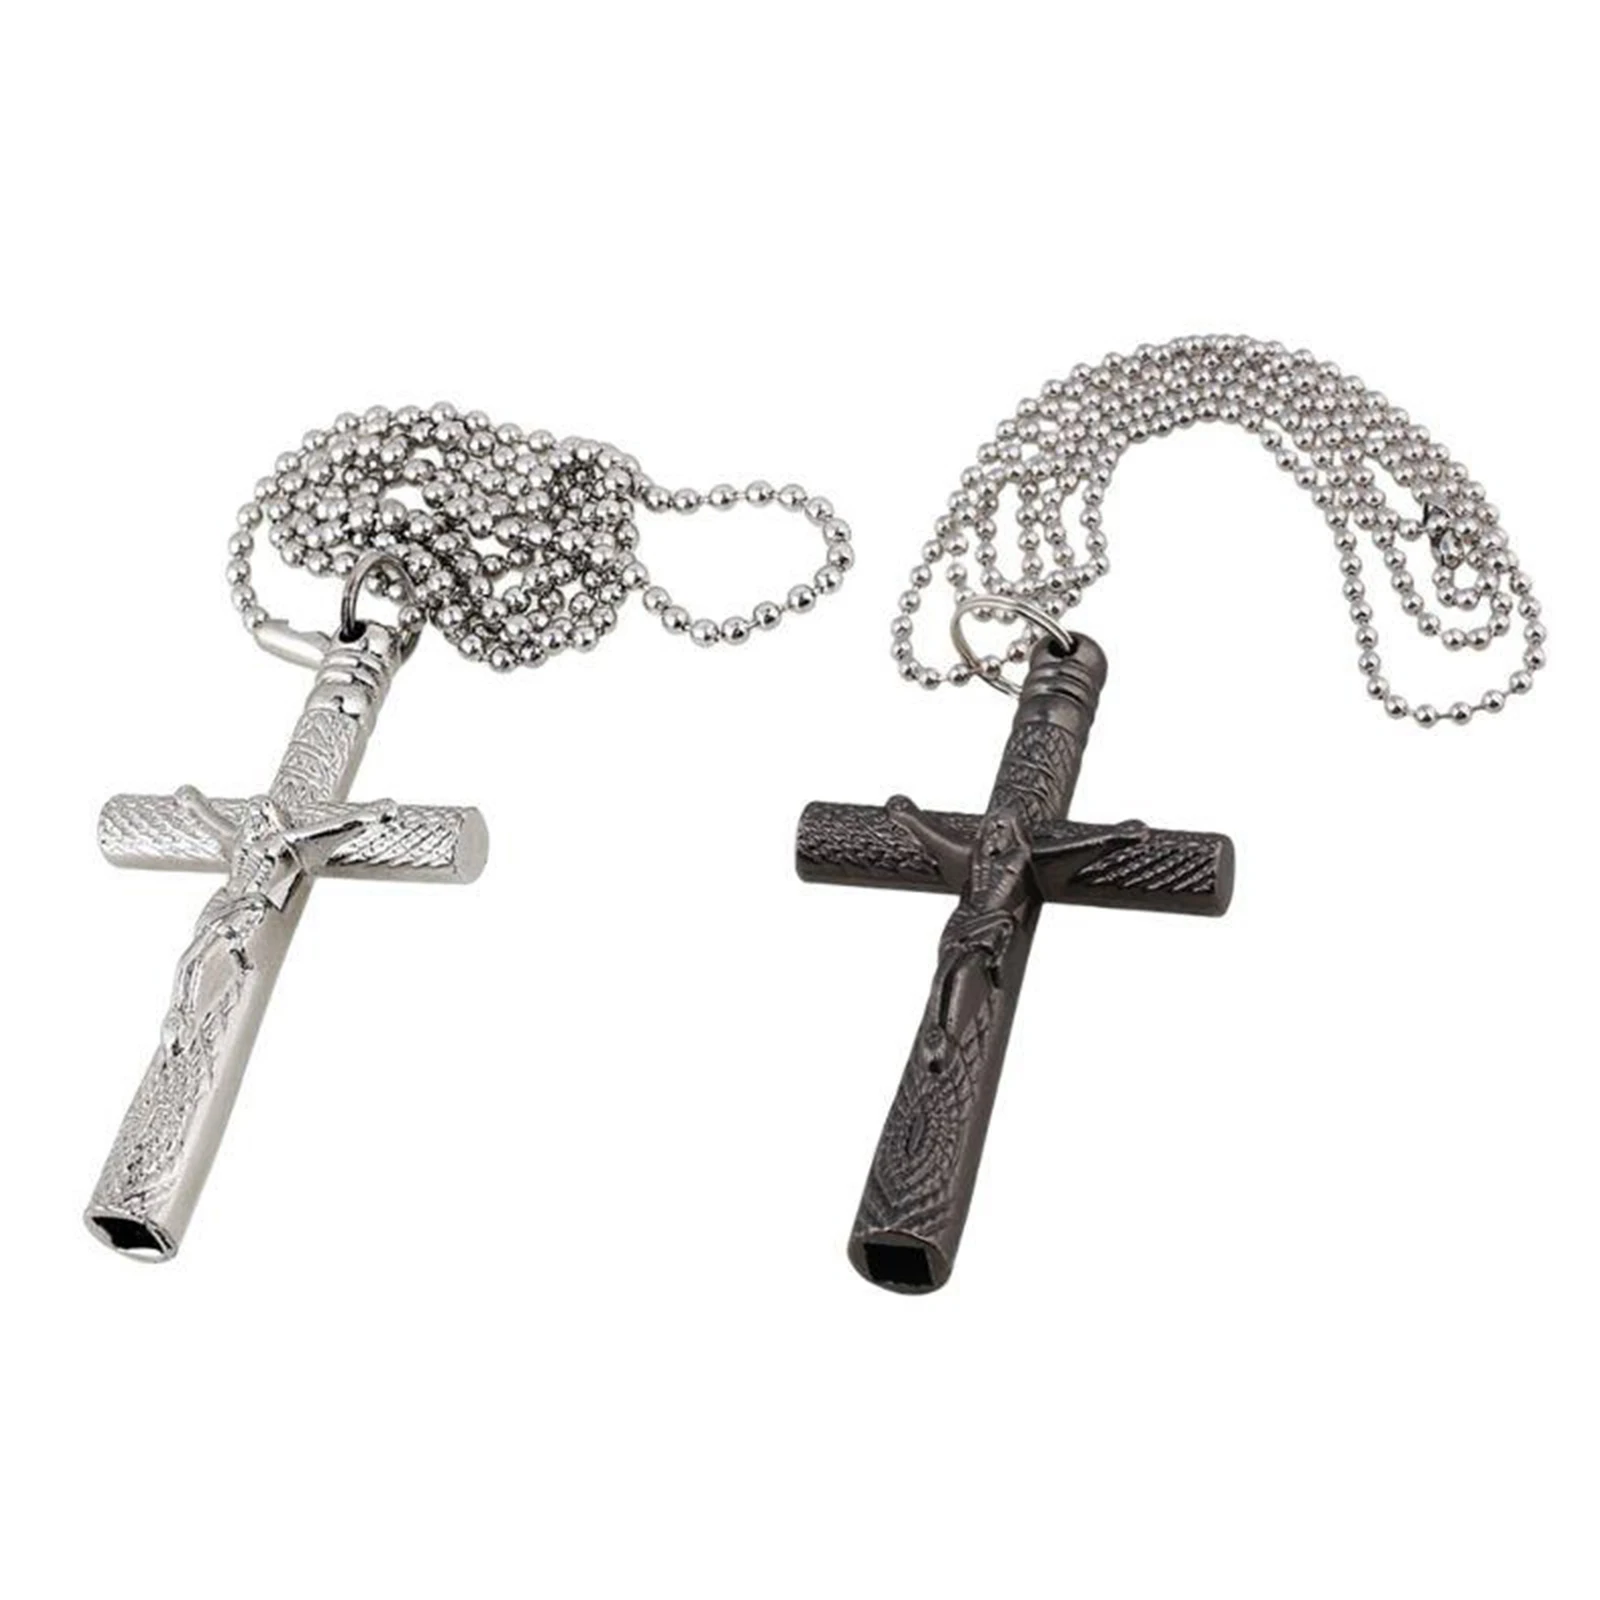 Steel Jesus Cross Drum Tuning Key Pendant Wrench Instruments Parts Accessory